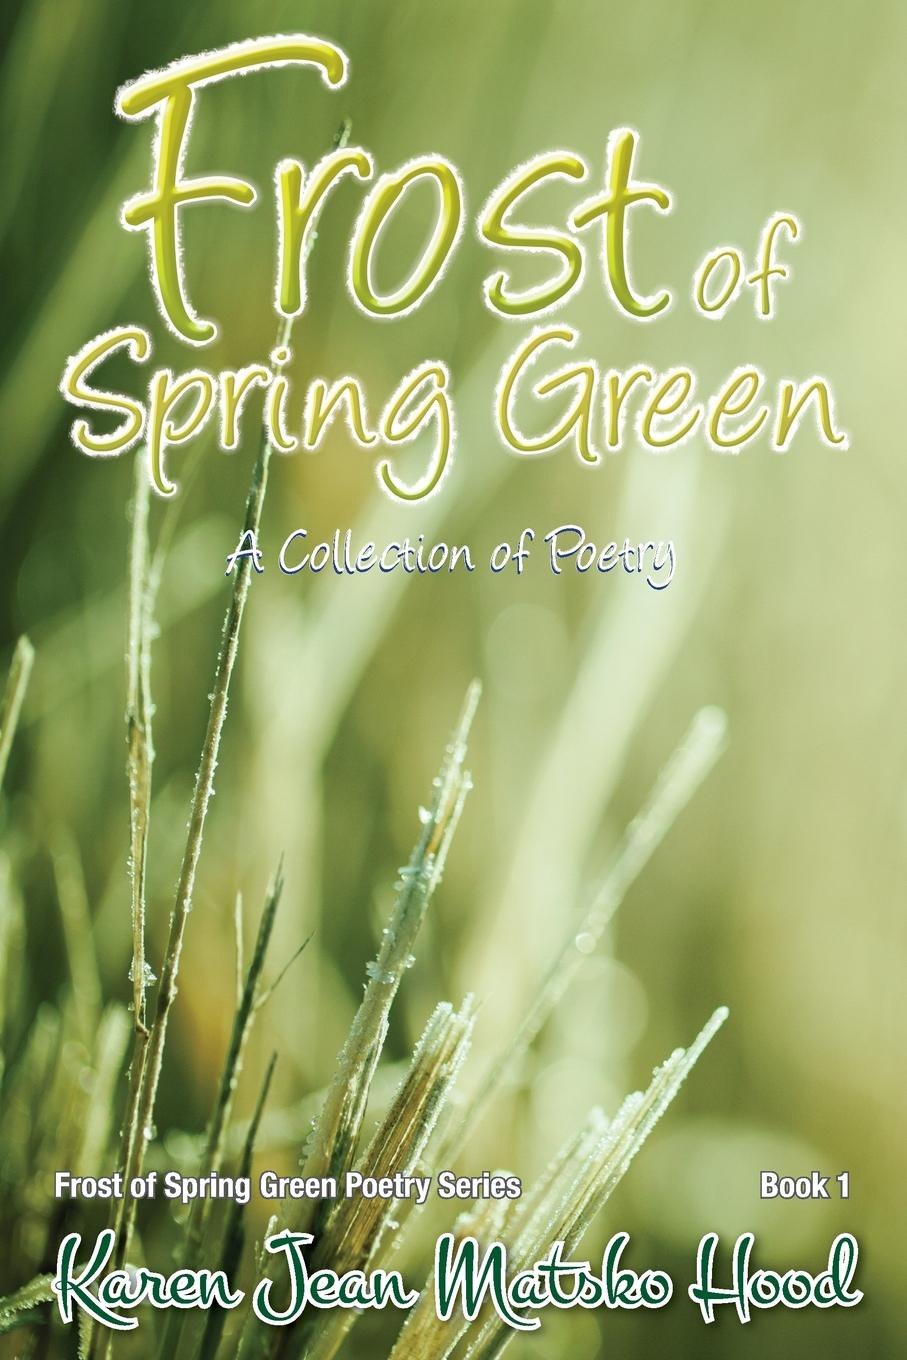 Frost of Spring Green a Collection of Poetry. A Collection of Poetry